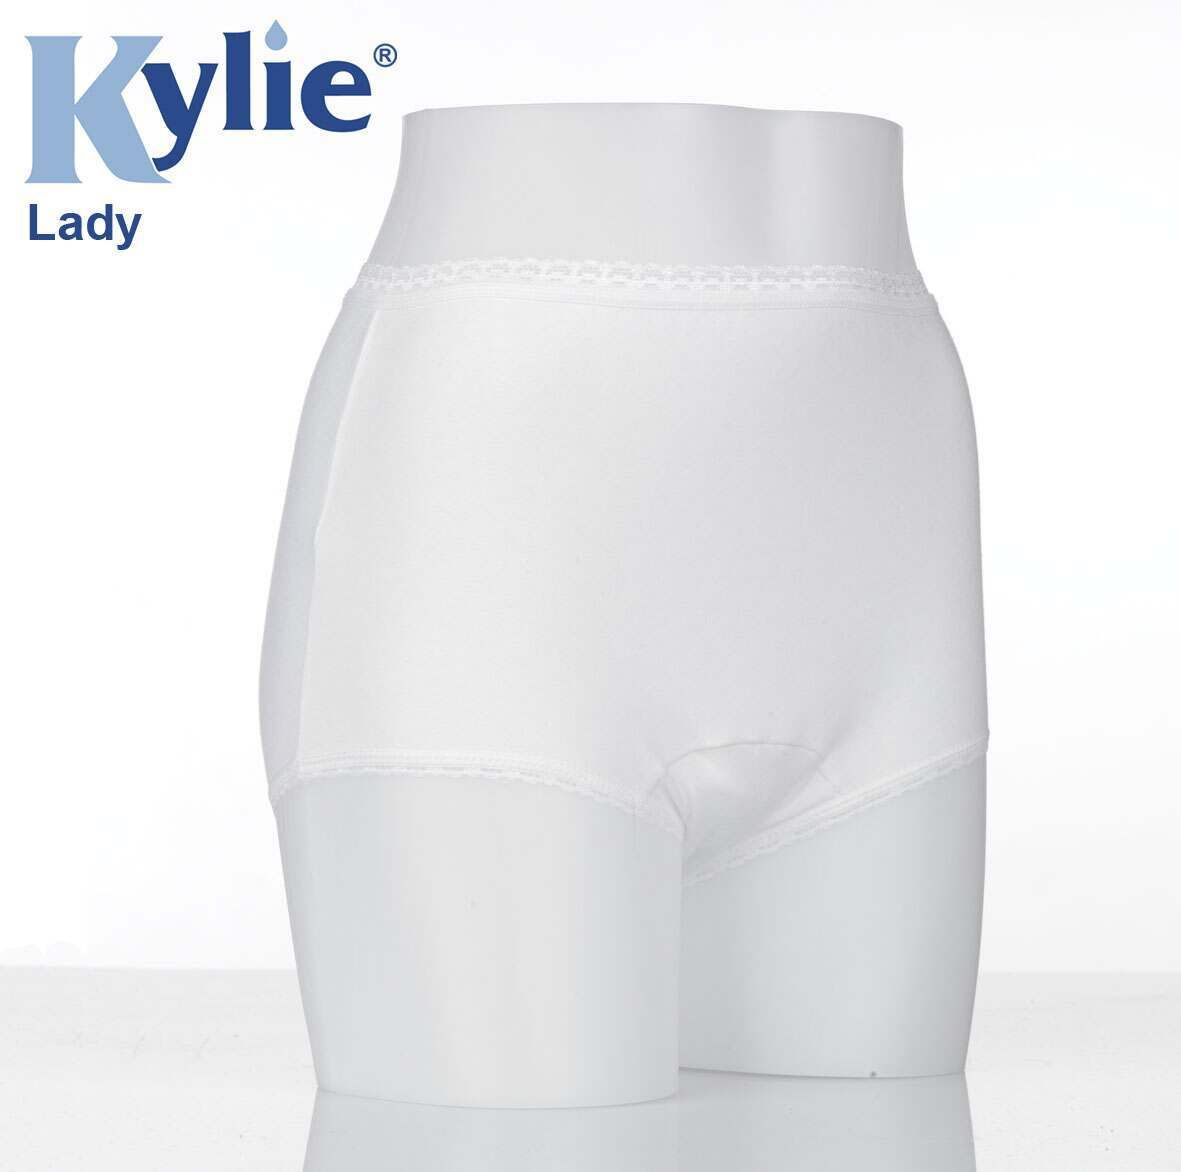 Black Kylie Lady Washable Incontinence Pants Small 